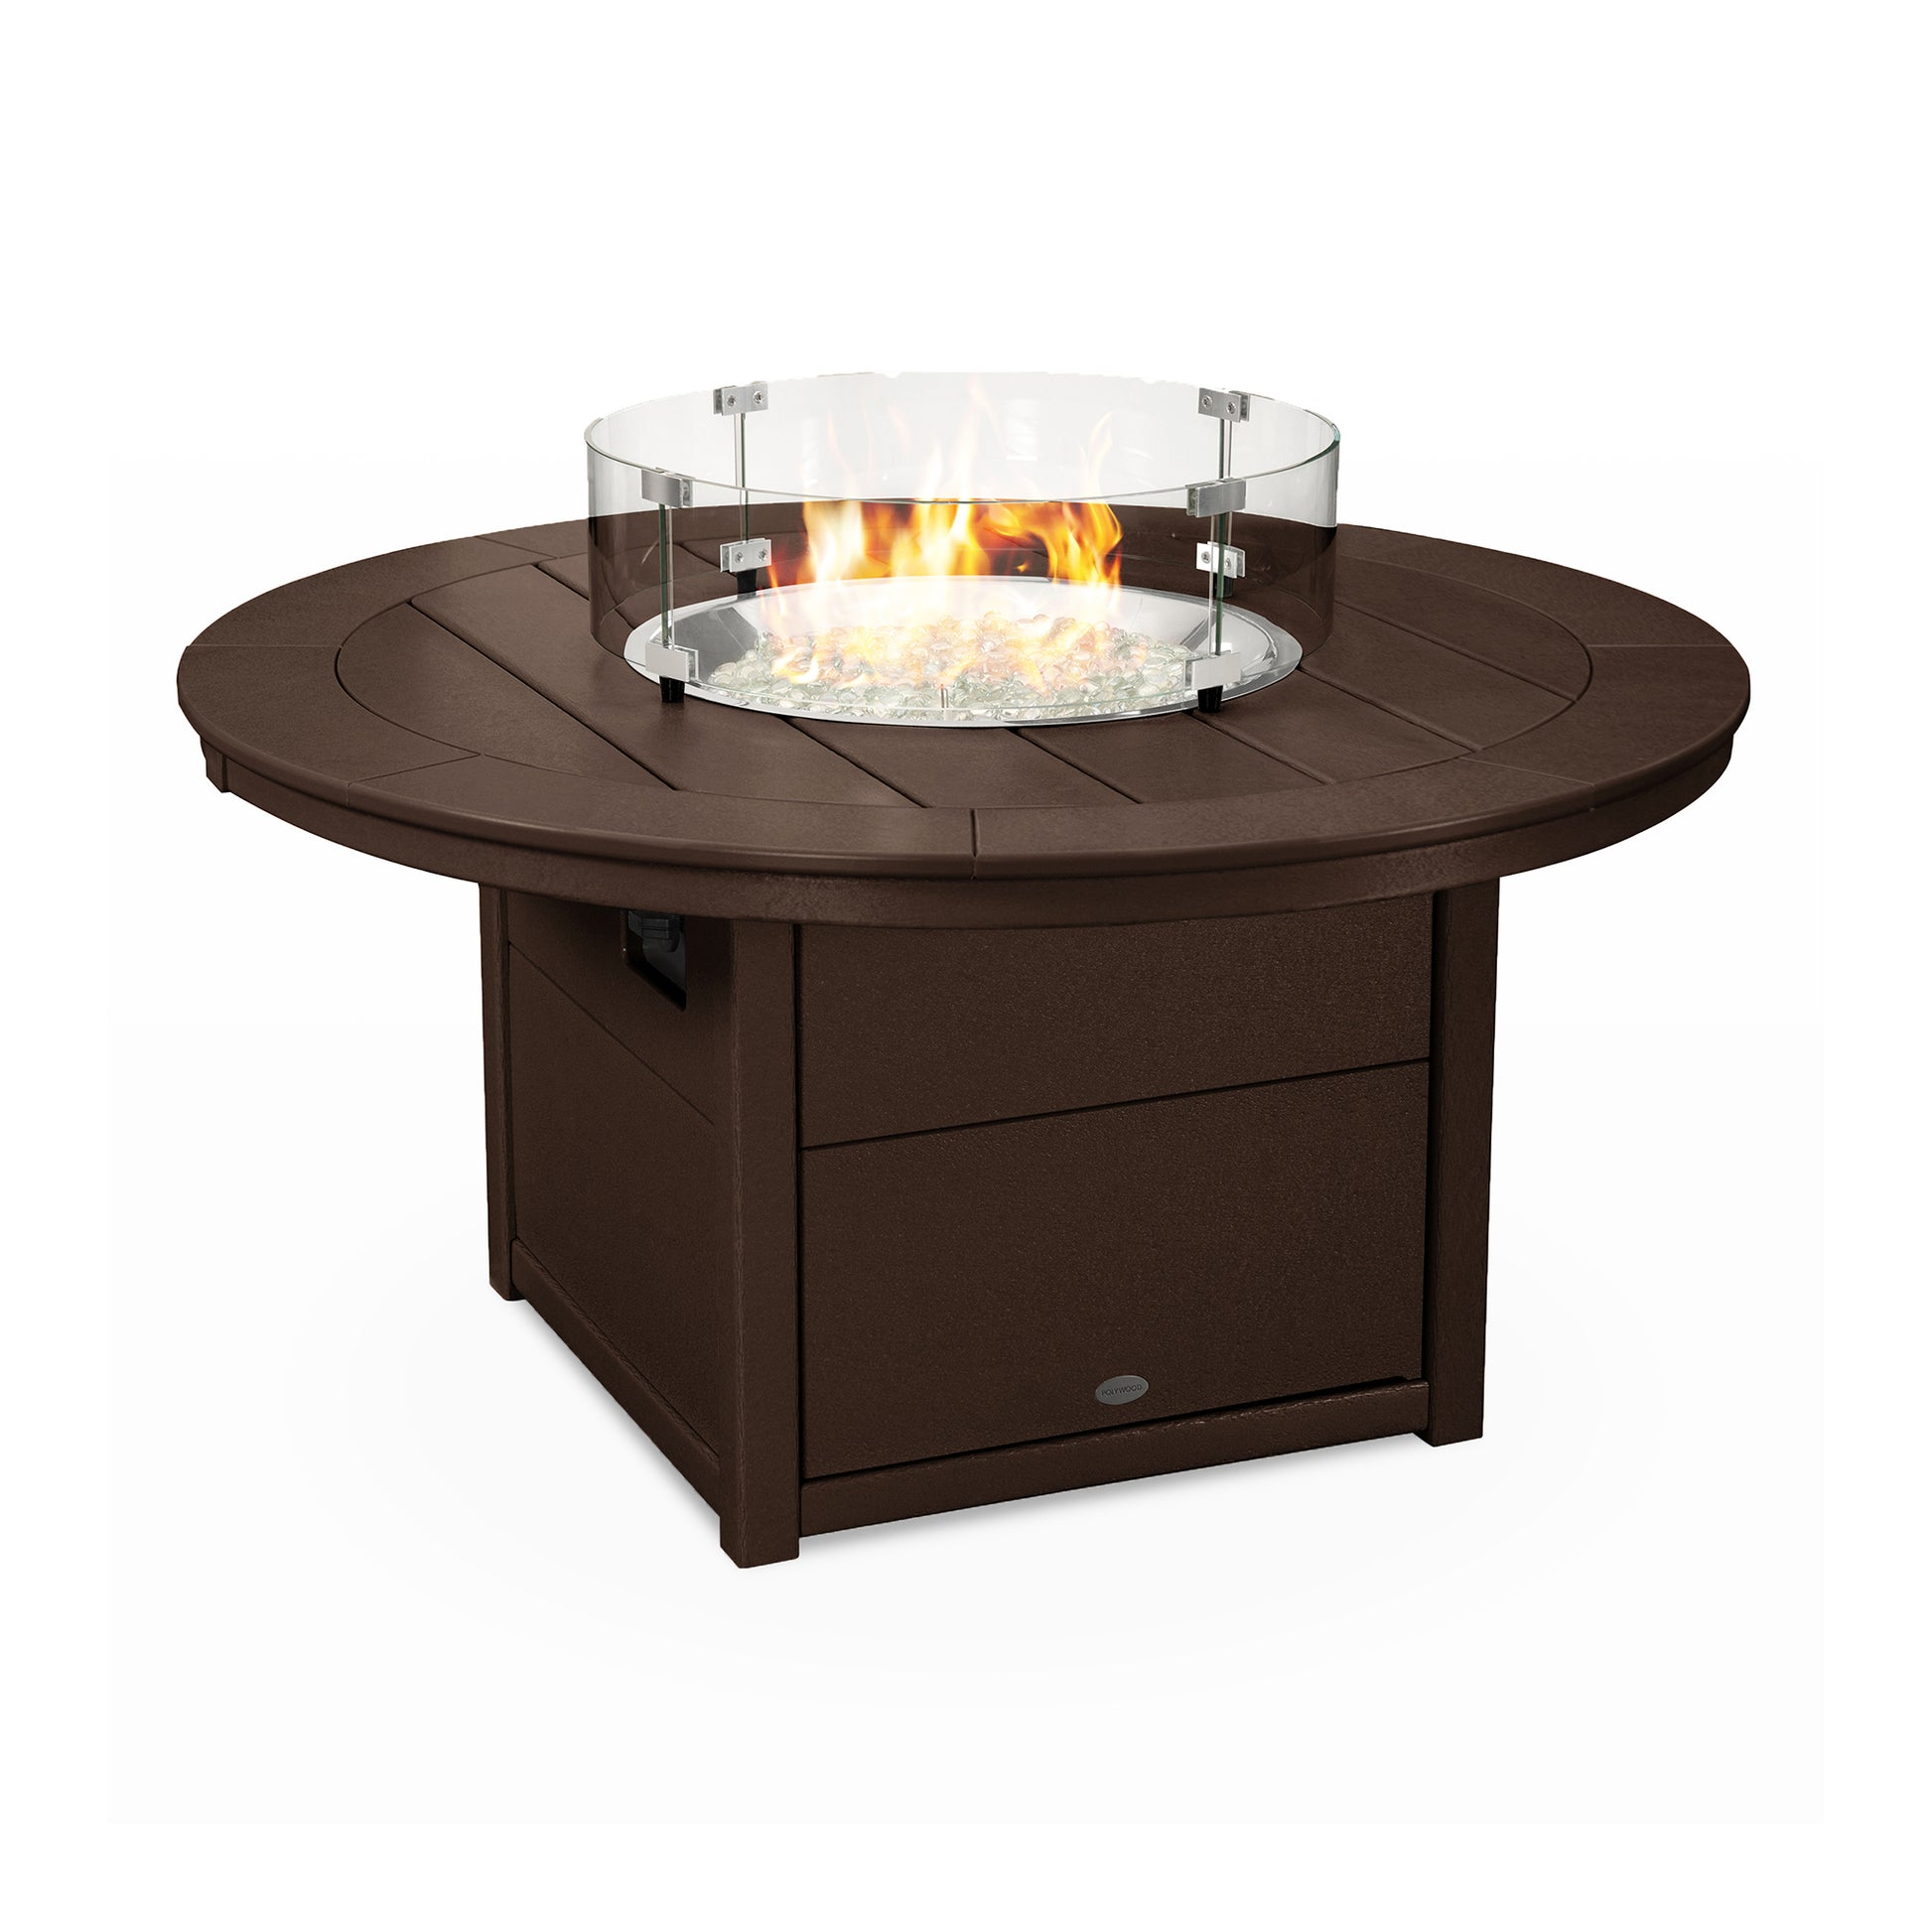 Enhance your outdoor ambiance with the stylish POLYWOOD® Round 48" Fire Pit Table.